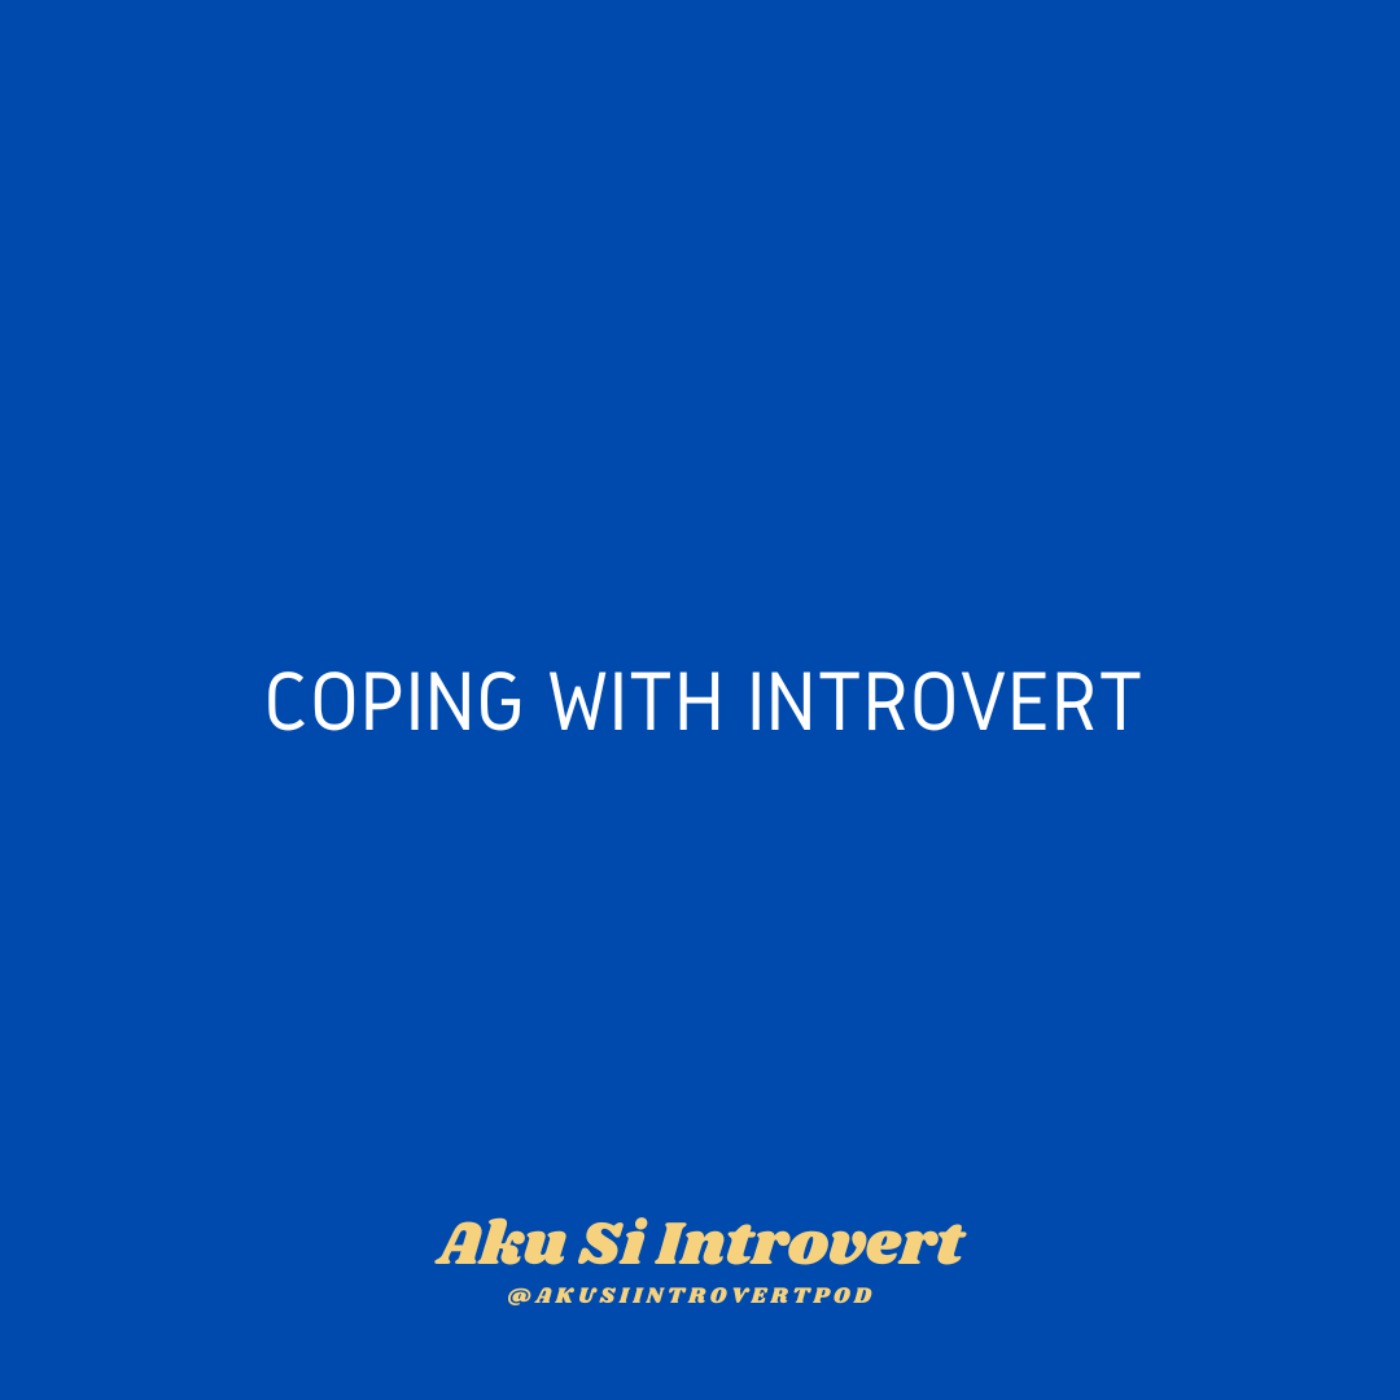 INTROVERT SERIES: Coping with Introvert